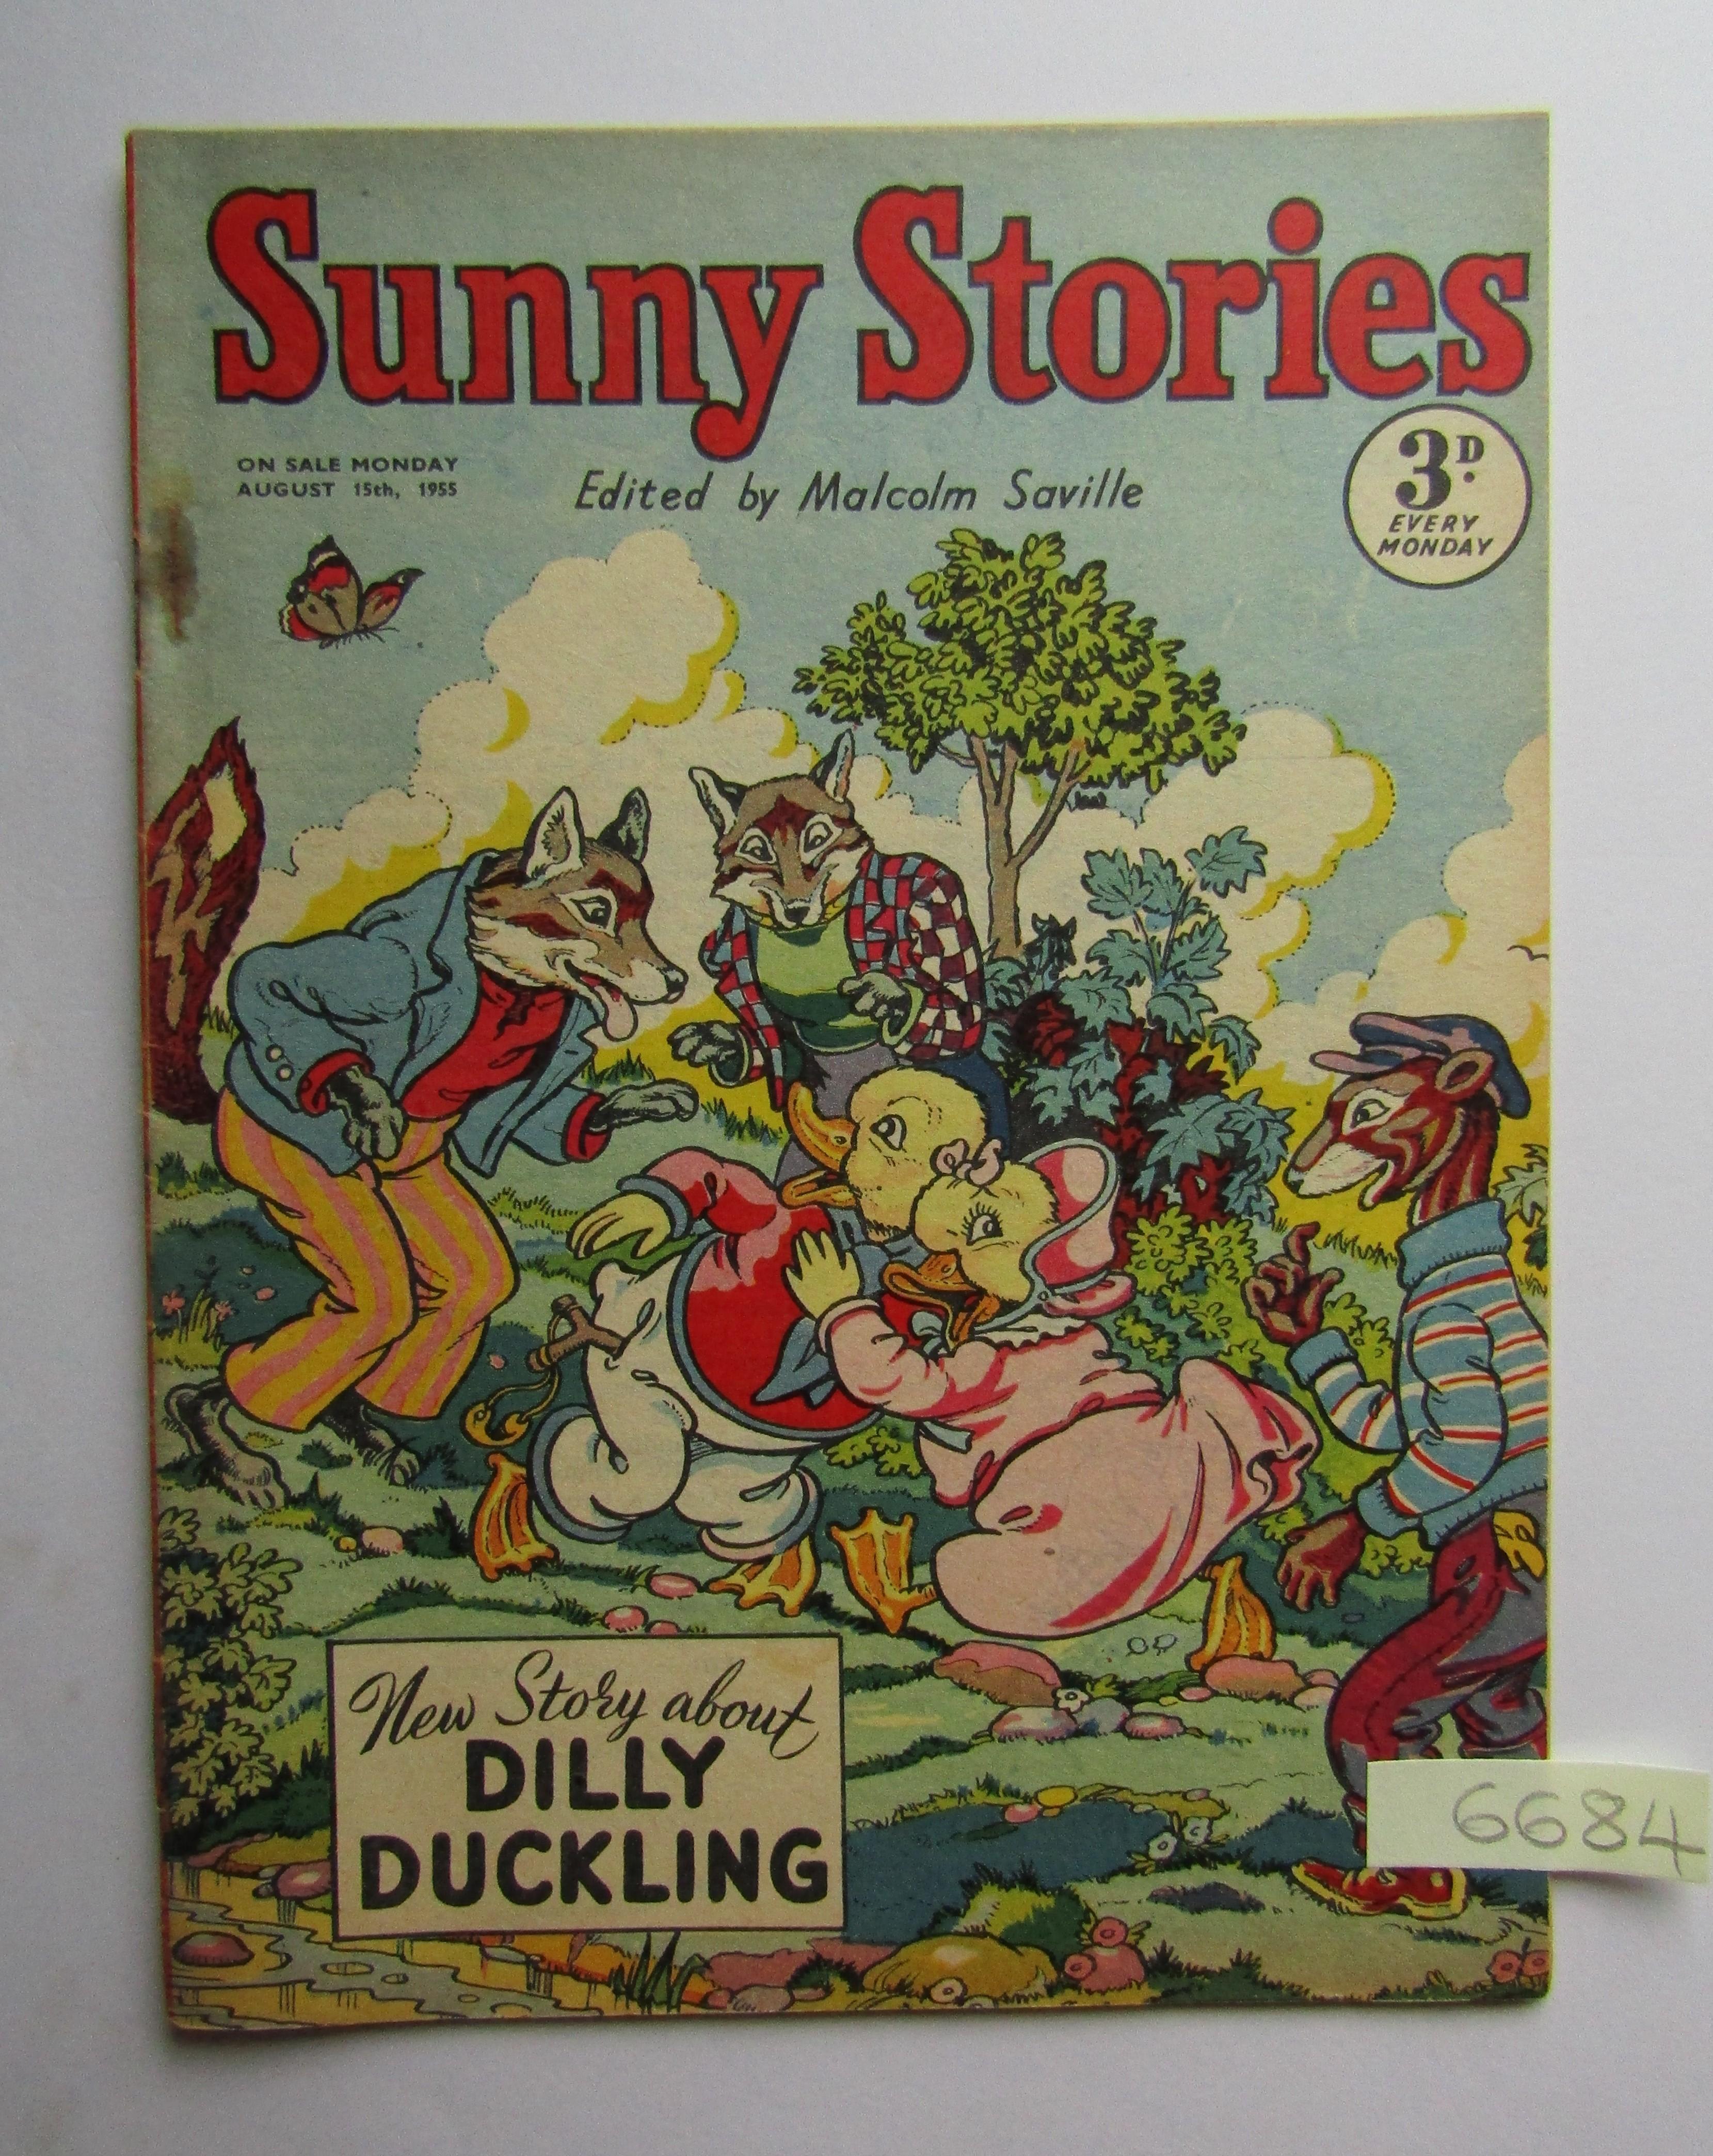 Duckling　(1955)　Soft　Books　de　Good　and　New　Saville:　cover　(Sunny　Malcolm　about　Story　Stories)　Dilly　Waimakariri　Prints　Limited